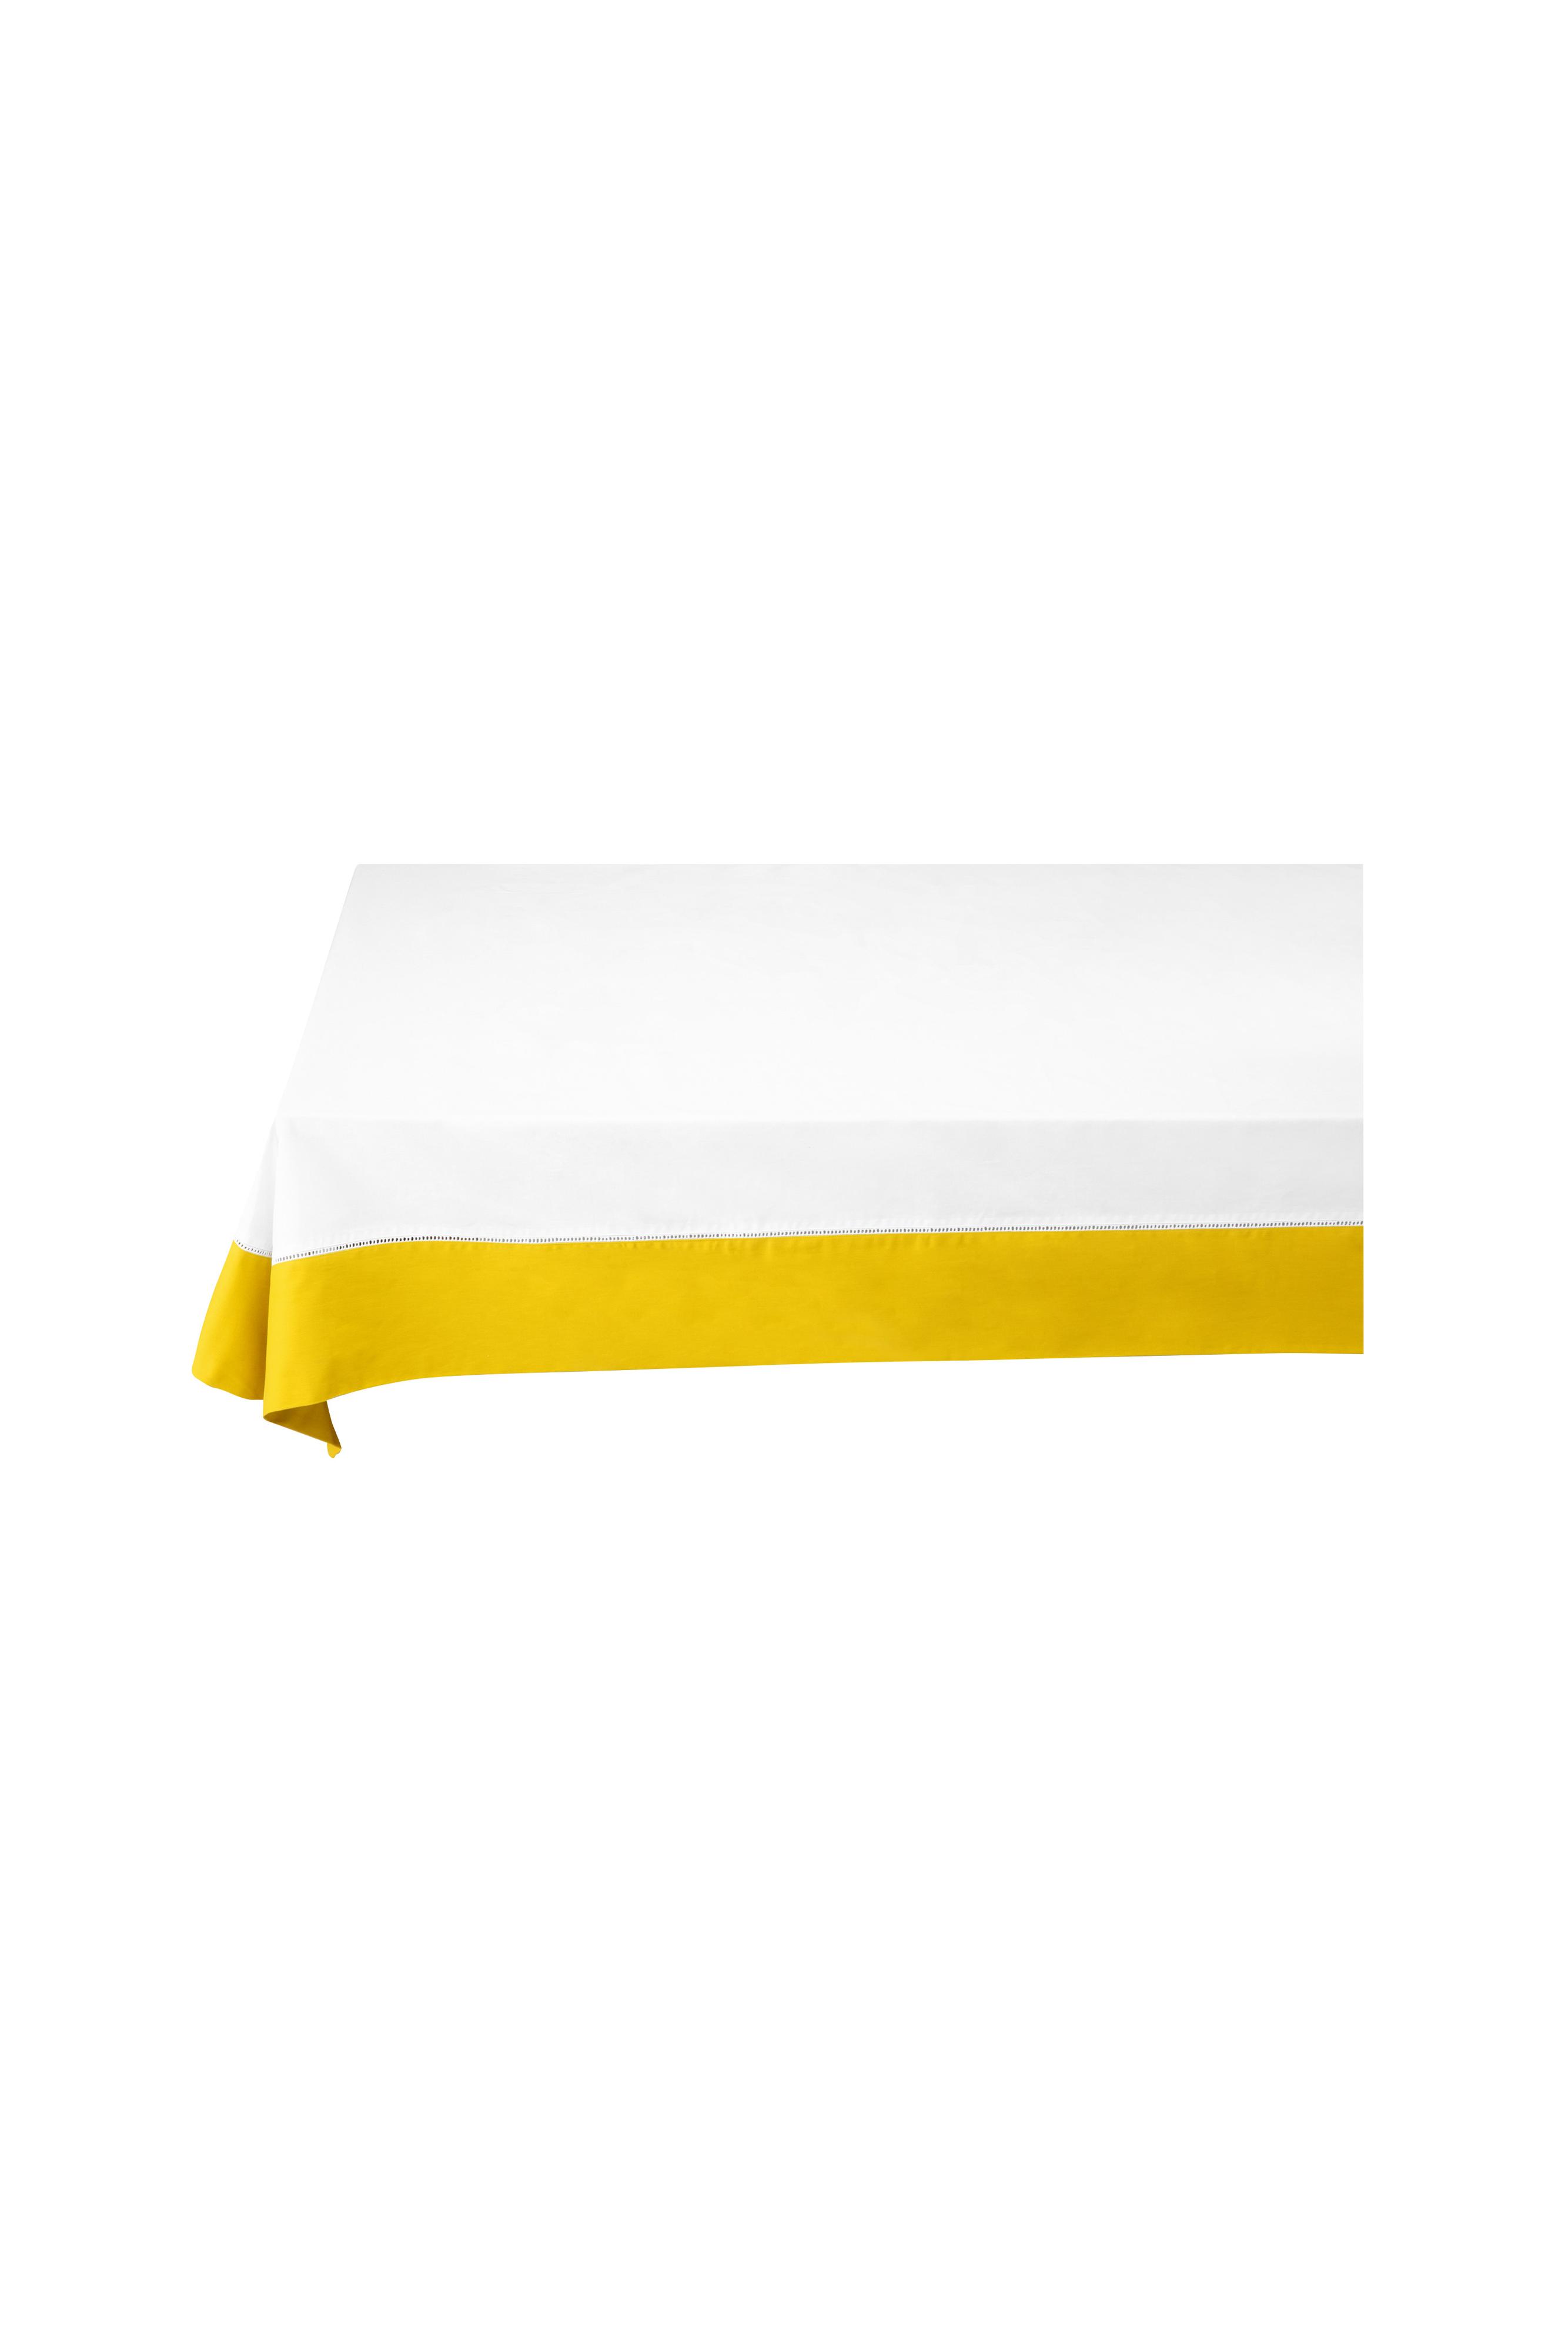 Table Cloth Pip Chique Yellow 150x190cm Gift